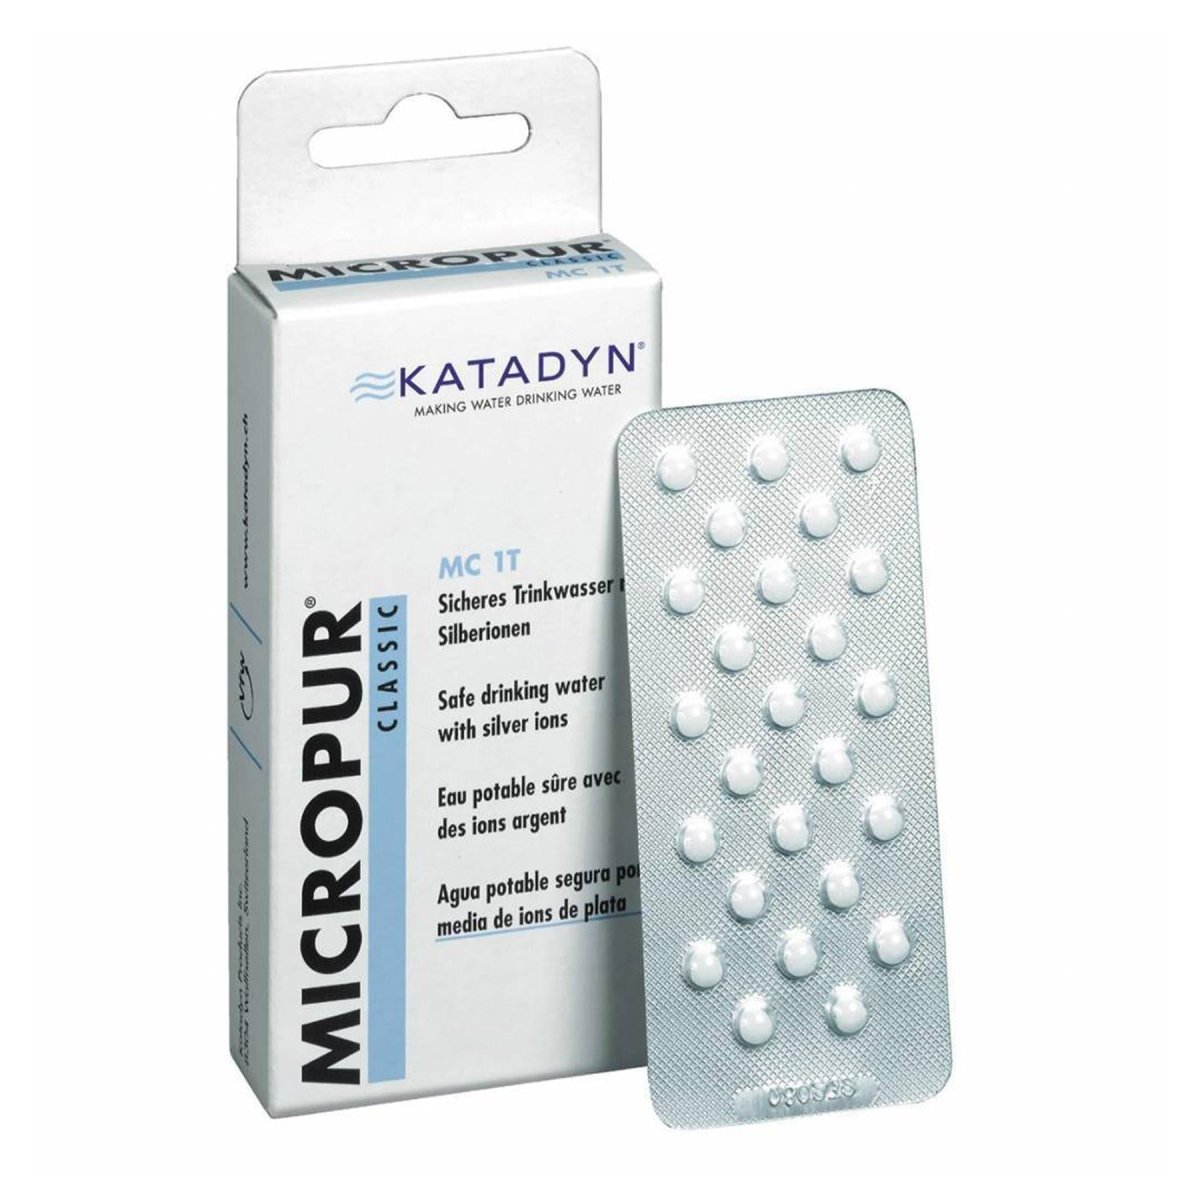 Katadyn Micropur Classic MC 1T drinking water conservation tablets pac -  GoMilitar